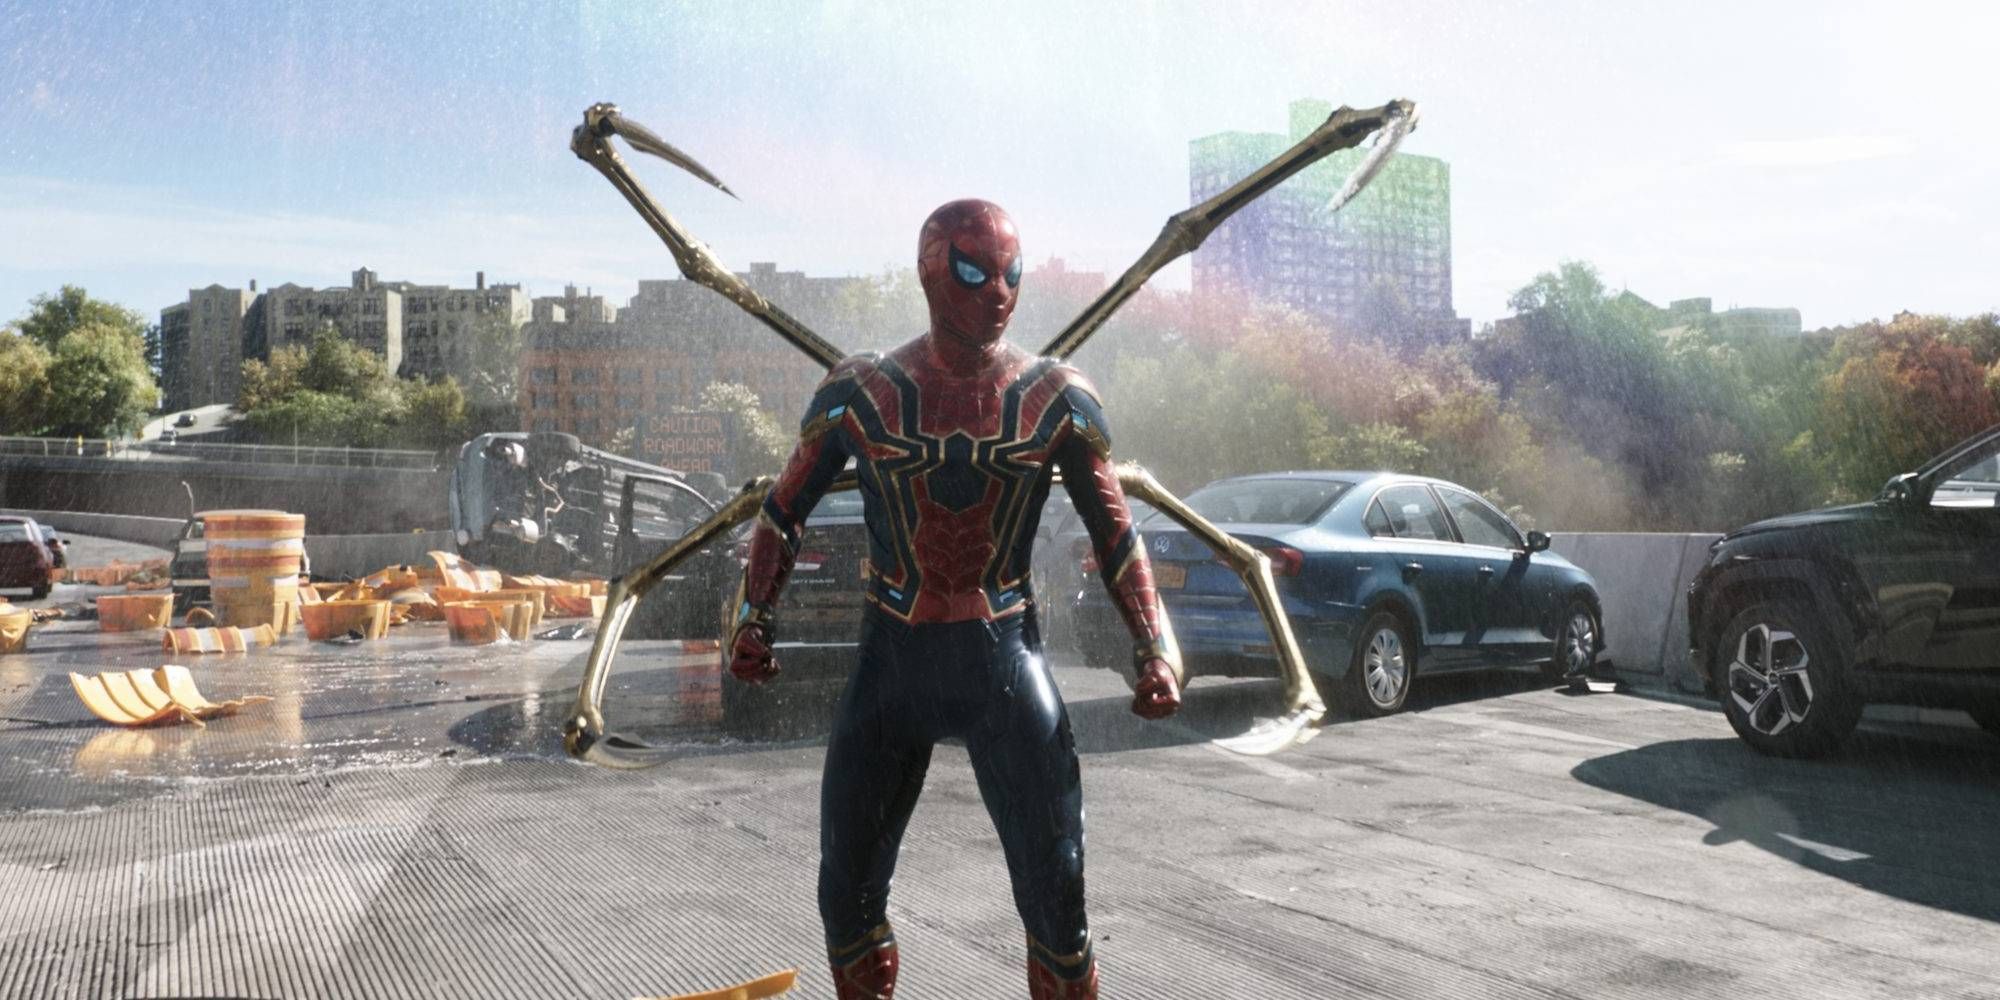 Spider-Man wearing the Iron Spider suit while standing on a bridge in Spider-Man: No Way Home